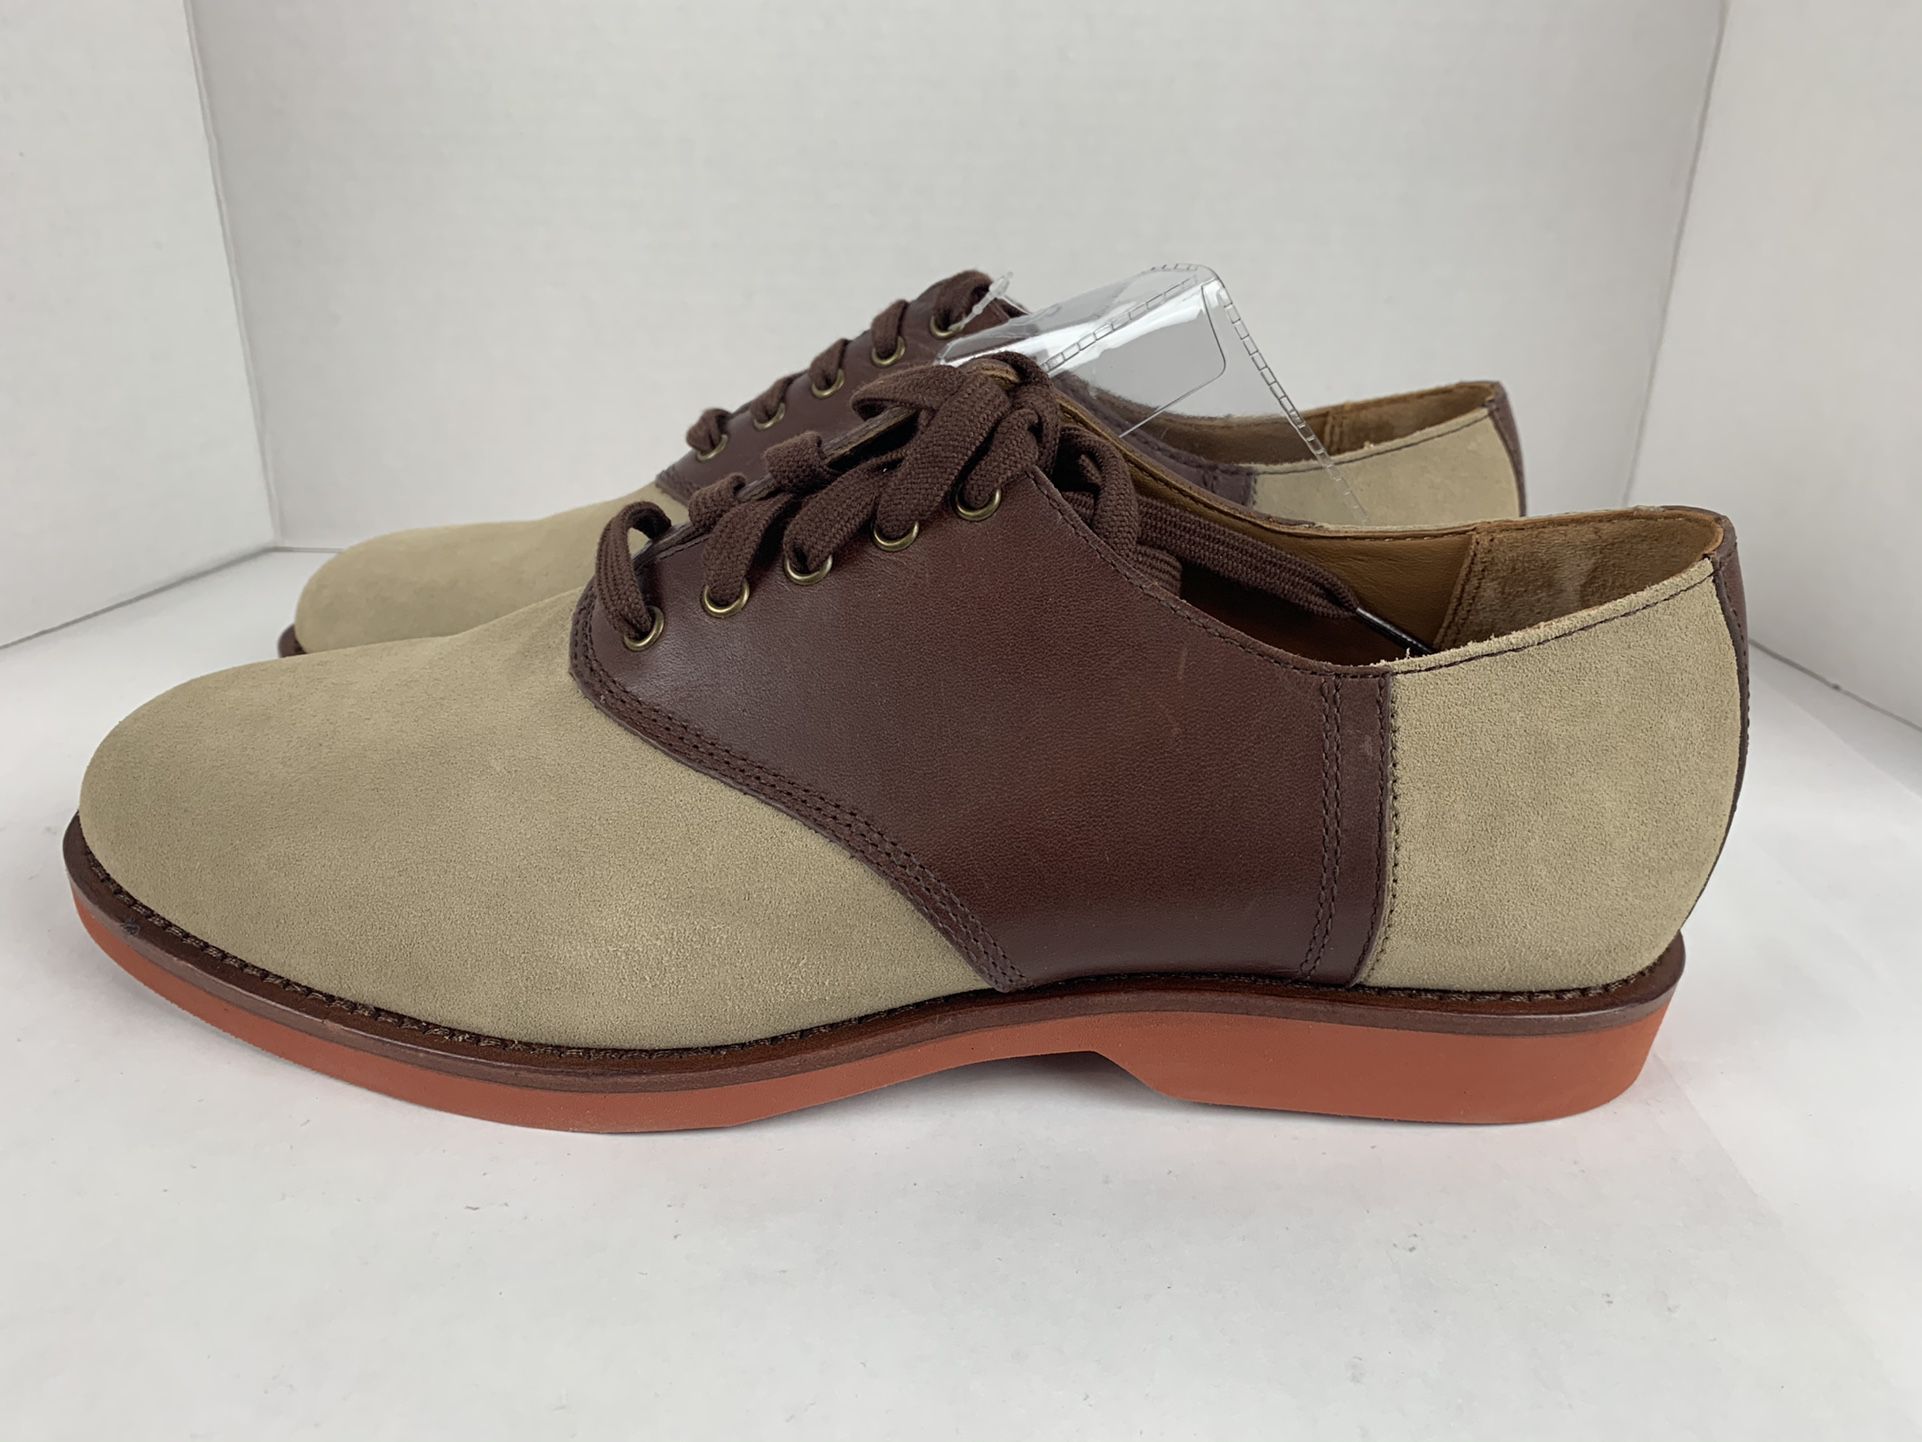 Polo by Ralph Lauren Men’s Orval Oxford Shoes Size 10.5D